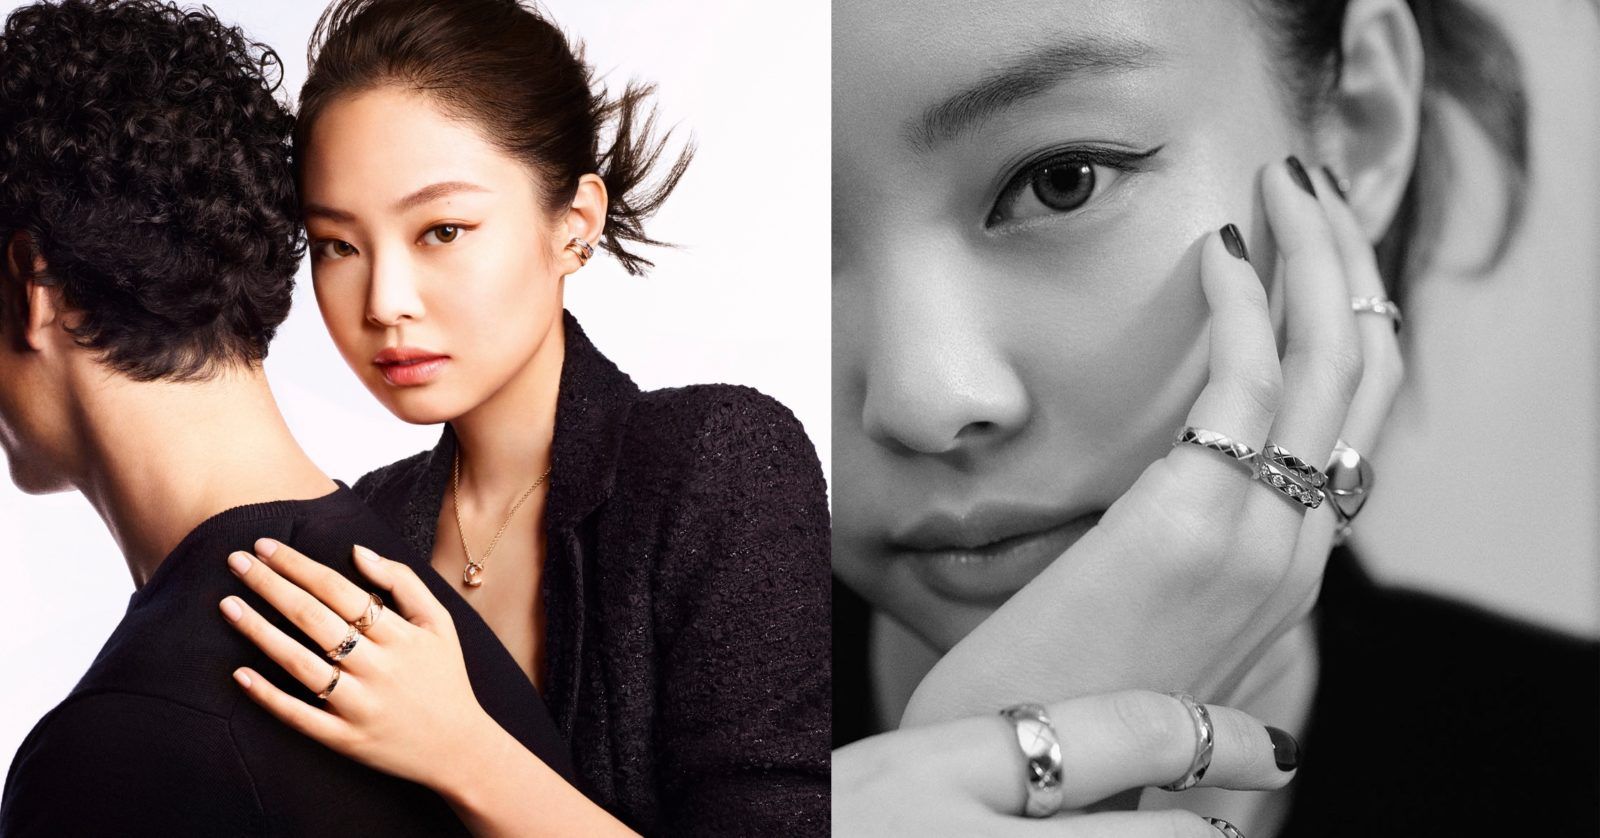 Blackpink's Jennie reveals the new Chanel Coco Crush jewellery collection